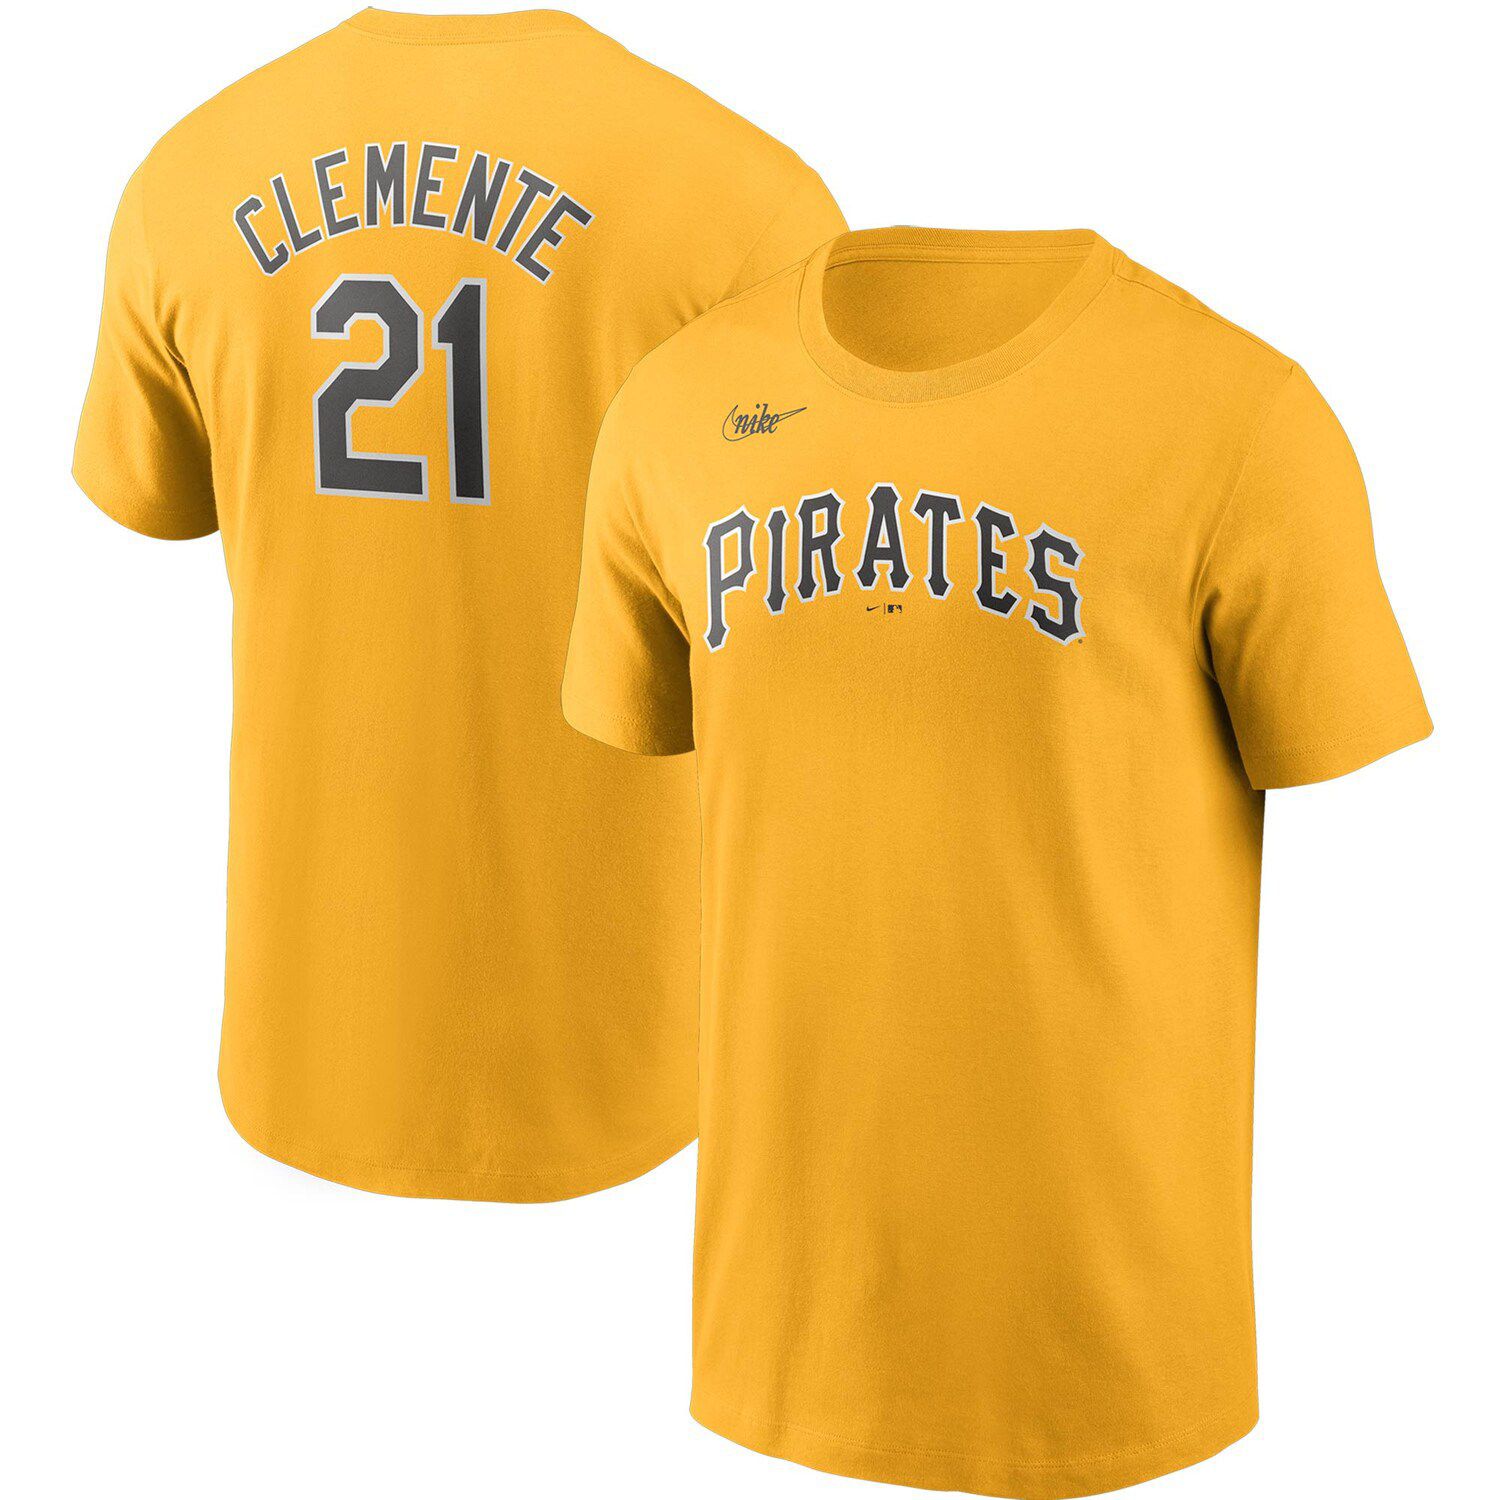 roberto clemente youth jersey